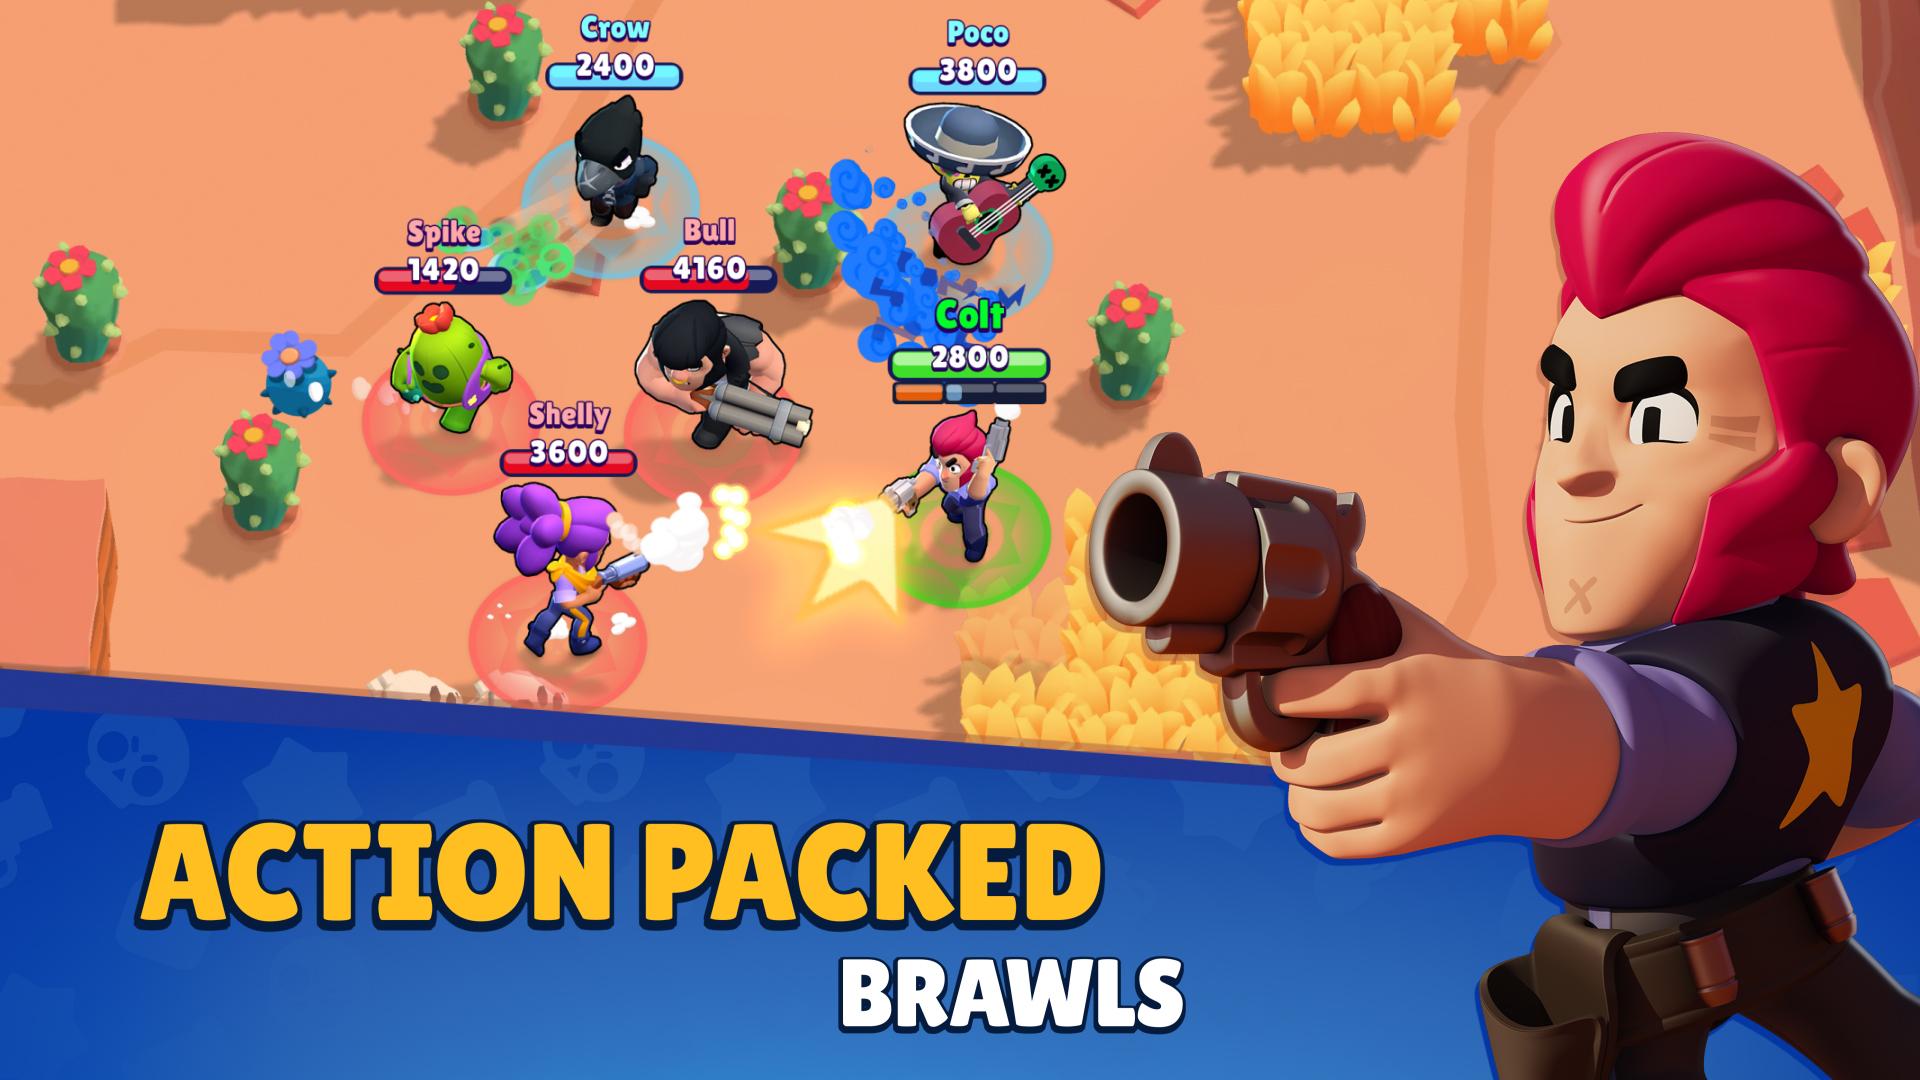 Brawl Stars How To Get The Most Bang For Your Gem Buck Premium Currency Guide Gameranx - brawl stars 100 brawl box chances